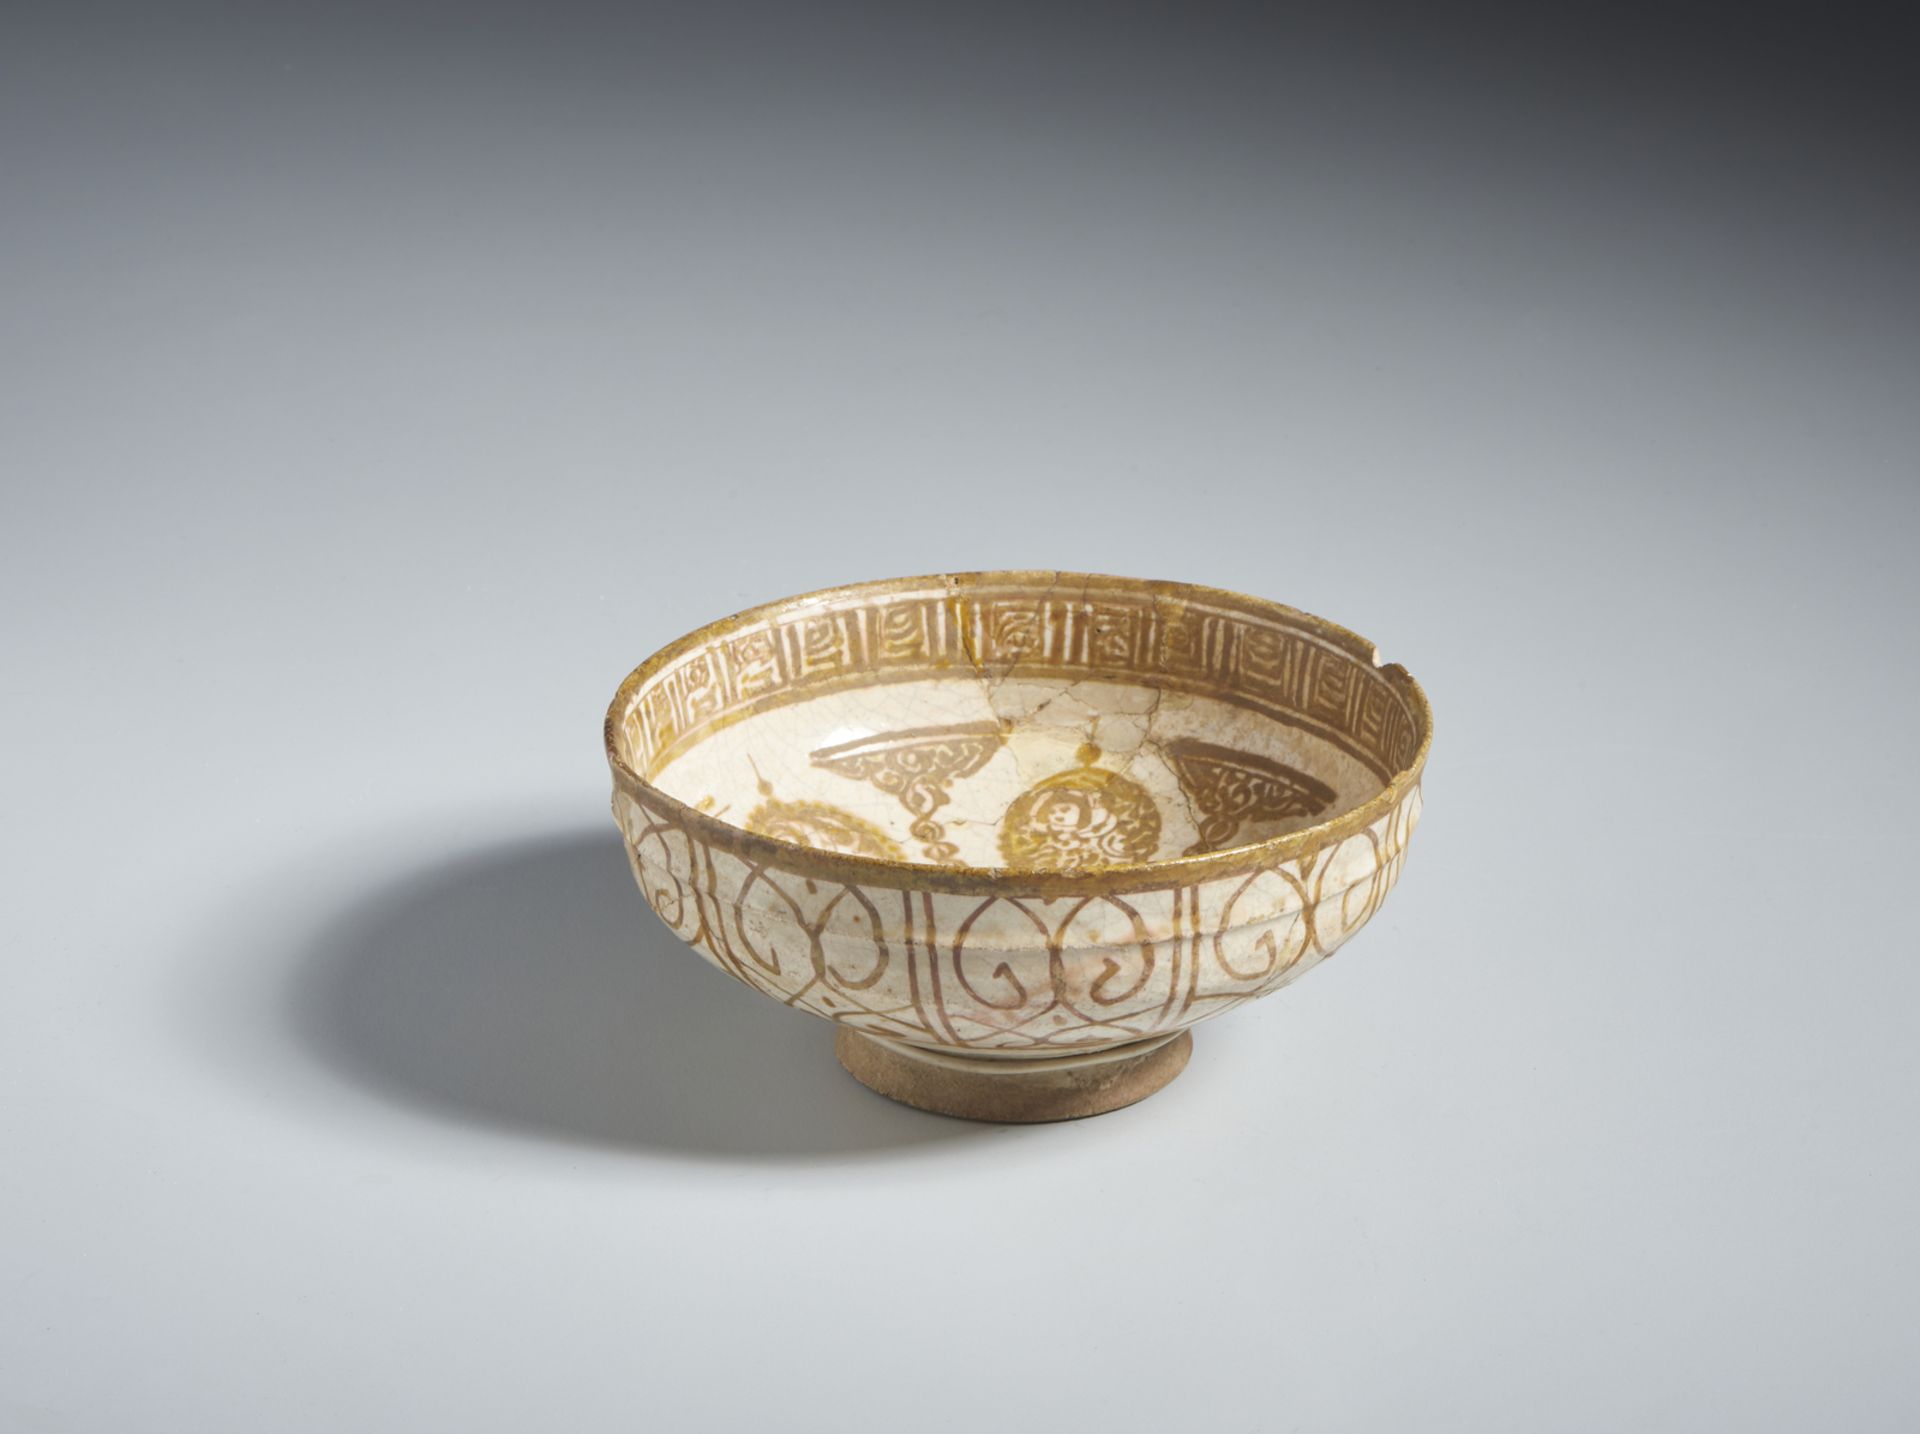 A lustre painted Kashan bowl Iran, Kashan, early 13th century Fritware body, lustre-painted in